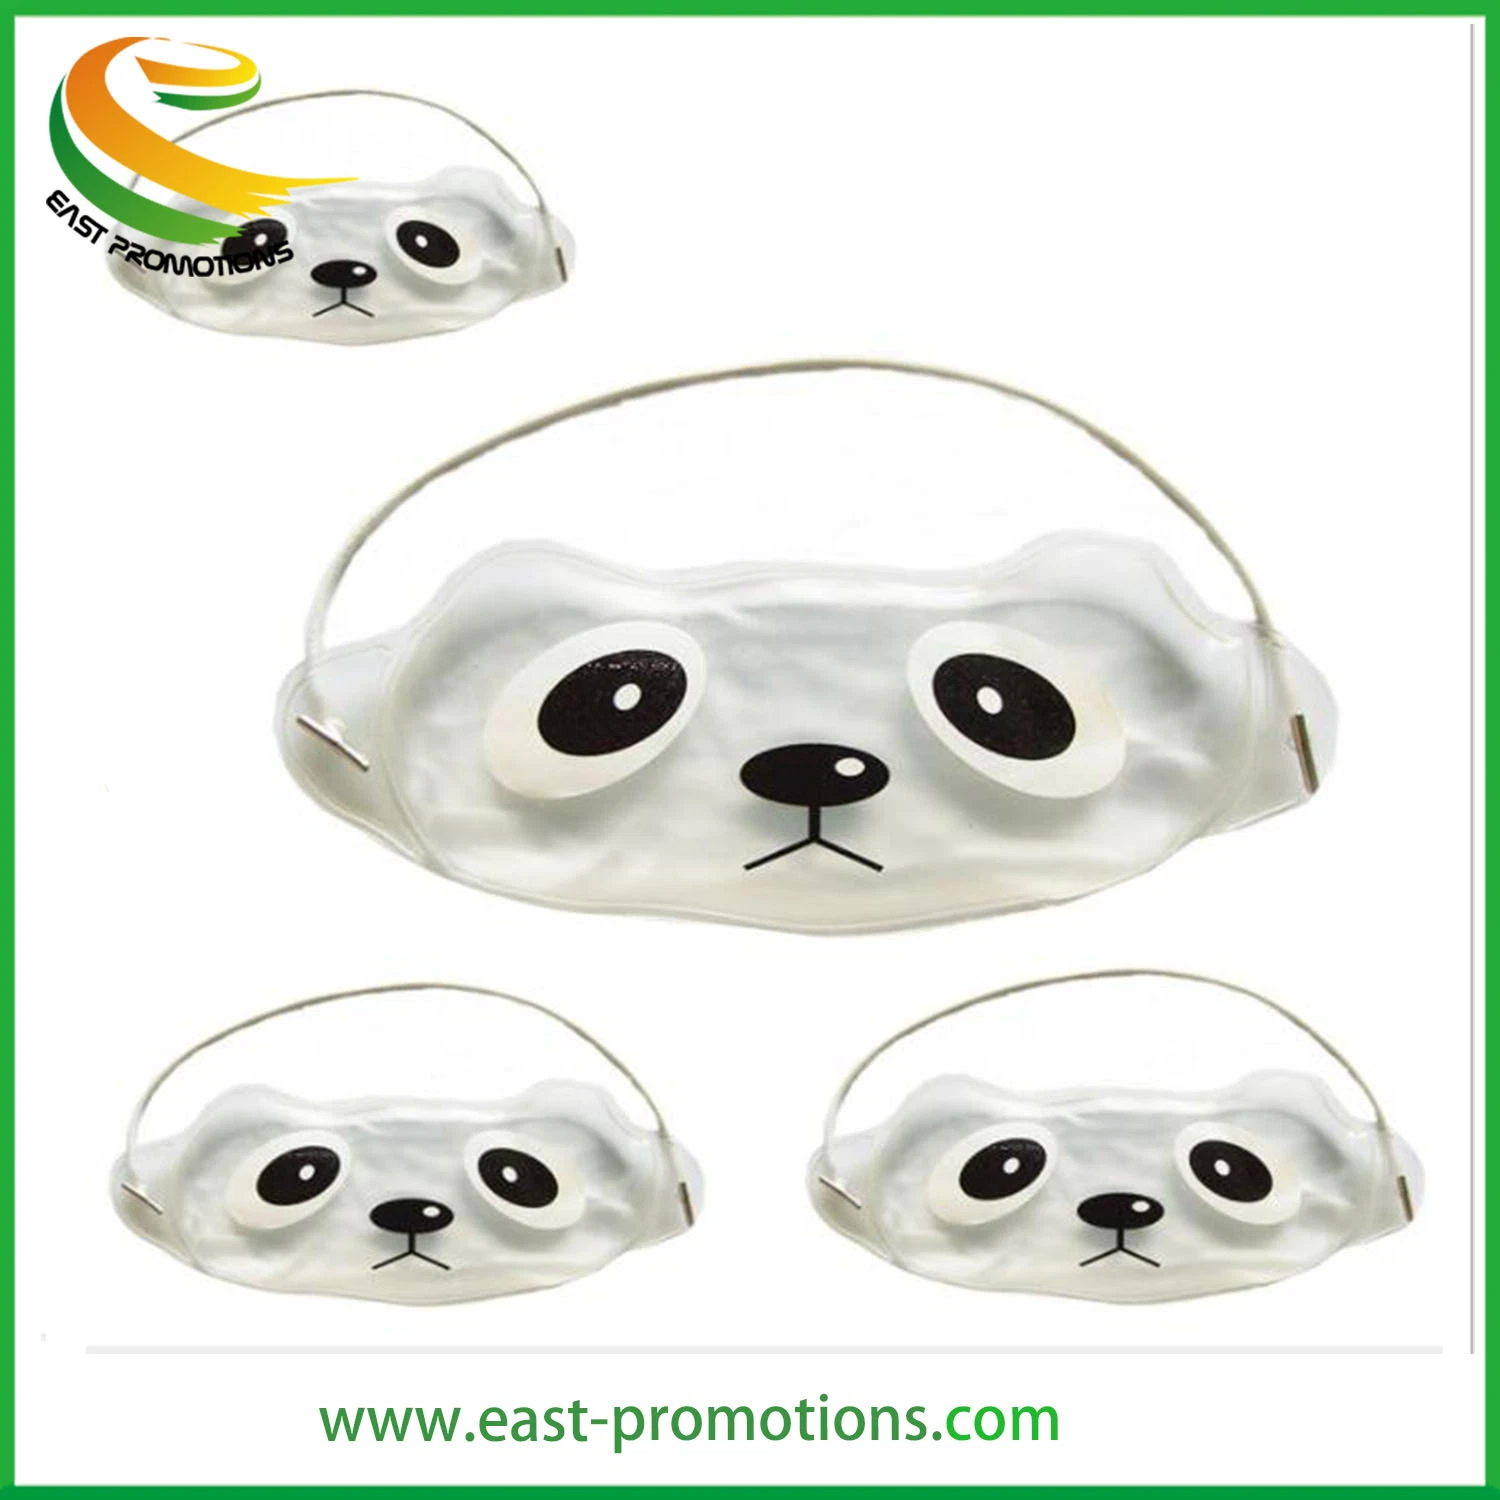 Reusable Sleep Hot Cold Gel Eye Mask for Eye Relax and Care Health